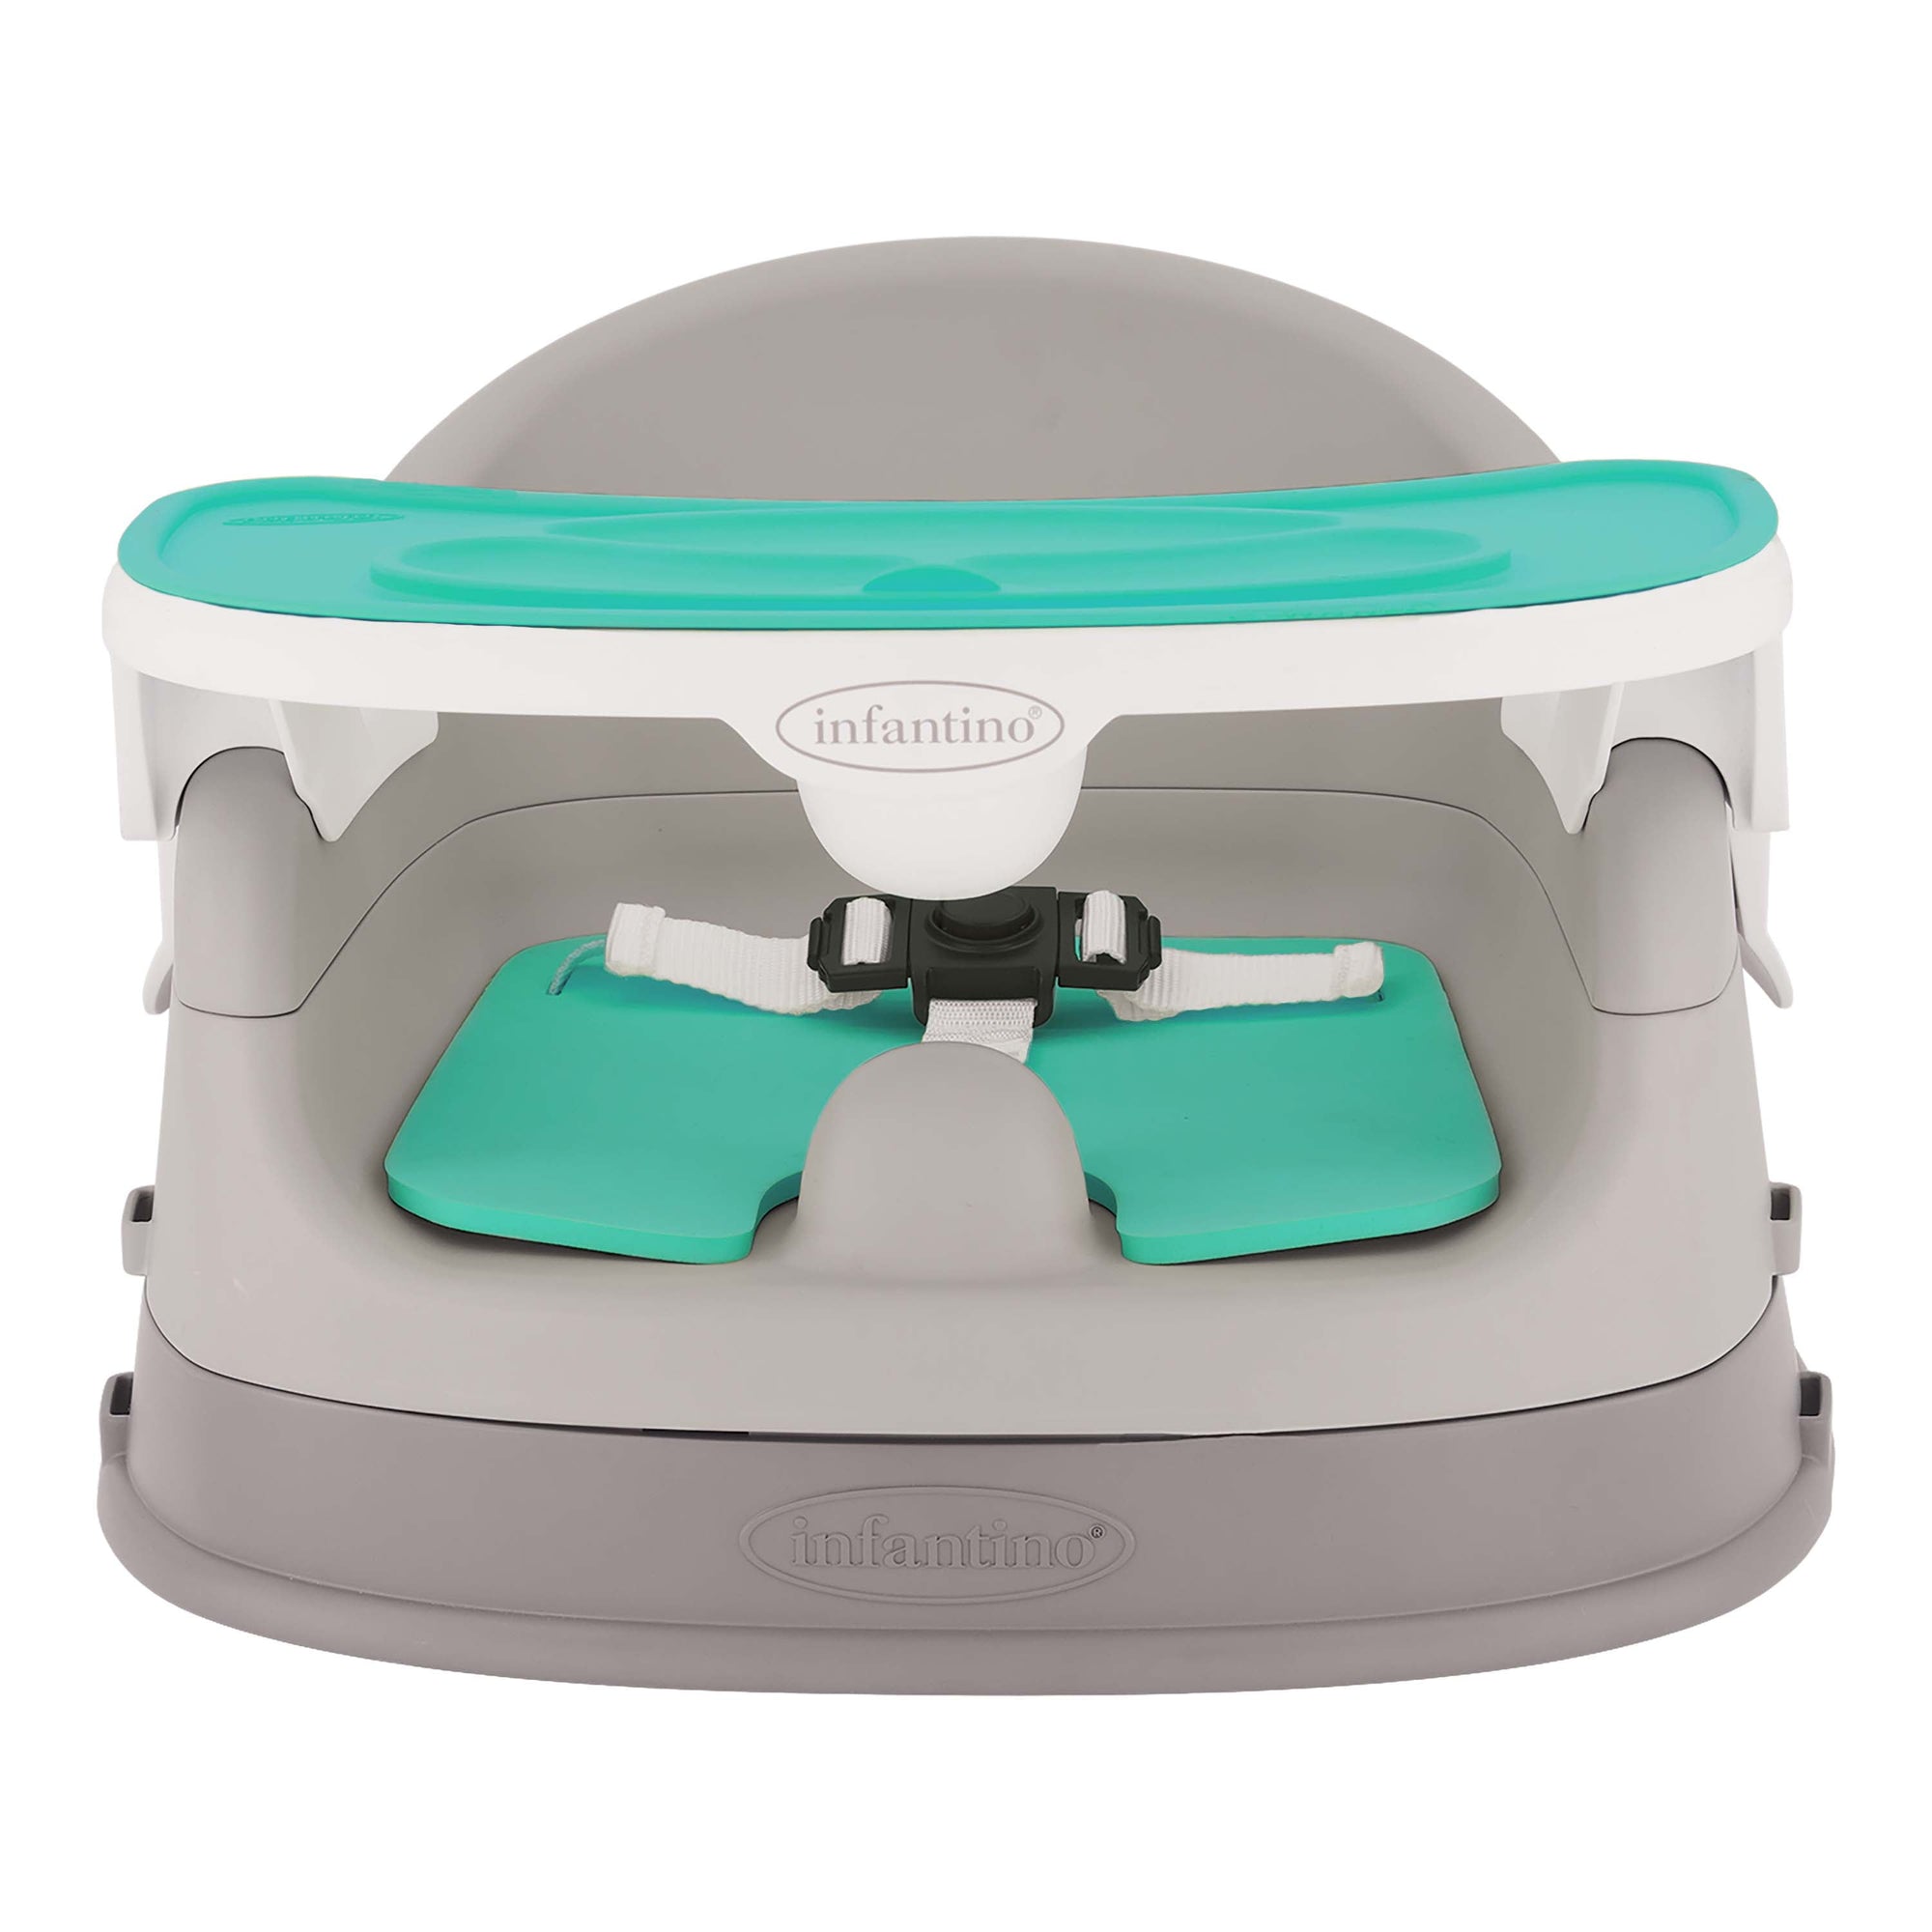 Infantino Grow-with-me 4-in-1 Two-Can-Dine Deluxe Feeding Booster Seat Teal & Grey 6 to 36 Months